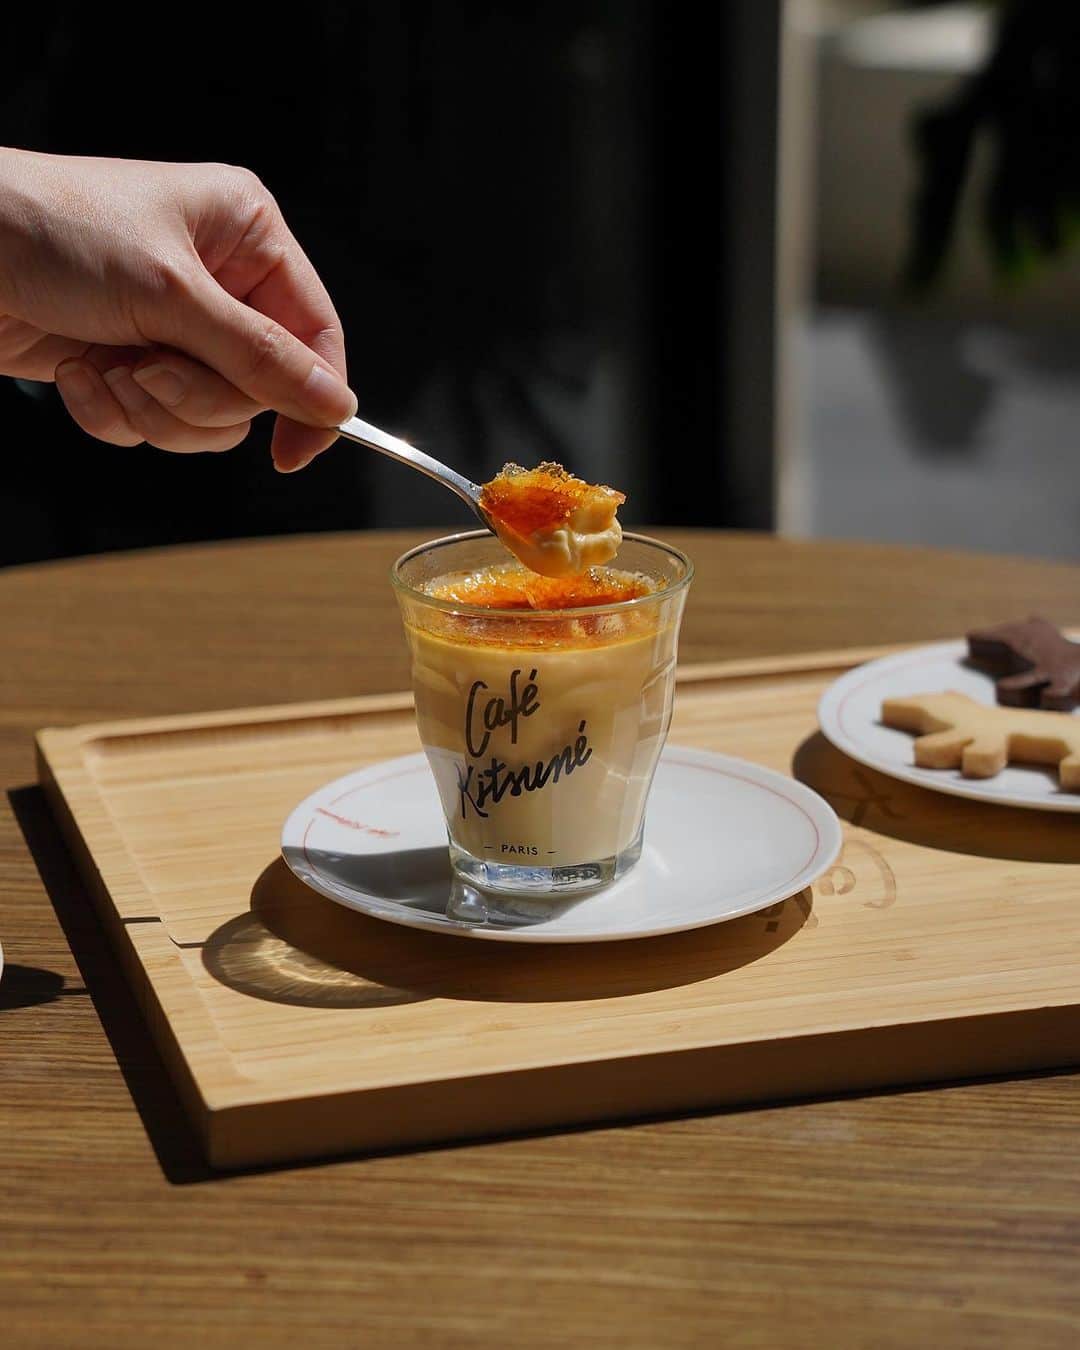 Café Kitsuné Parisのインスタグラム：「You can't resist the new sweet and savory specialties at #CafeKitsuneVelaa, visit us for your gourmet break and try our ‘Crème Brulée’, ‘Japanese Cheese Cake’ or be simply tempted by our delicious 'Matcha Pound' or ‘Salmon Bagel' and 'Croque Monsieur’ 🍮 - 👉 Café Kitsuné Velaa Café-Bar Velaa Sindhorn Village, 87 Langsuan Road, Lumphini, Pathumwan, Bangkok 10330 Monday-Sunday: 10am-10pm」